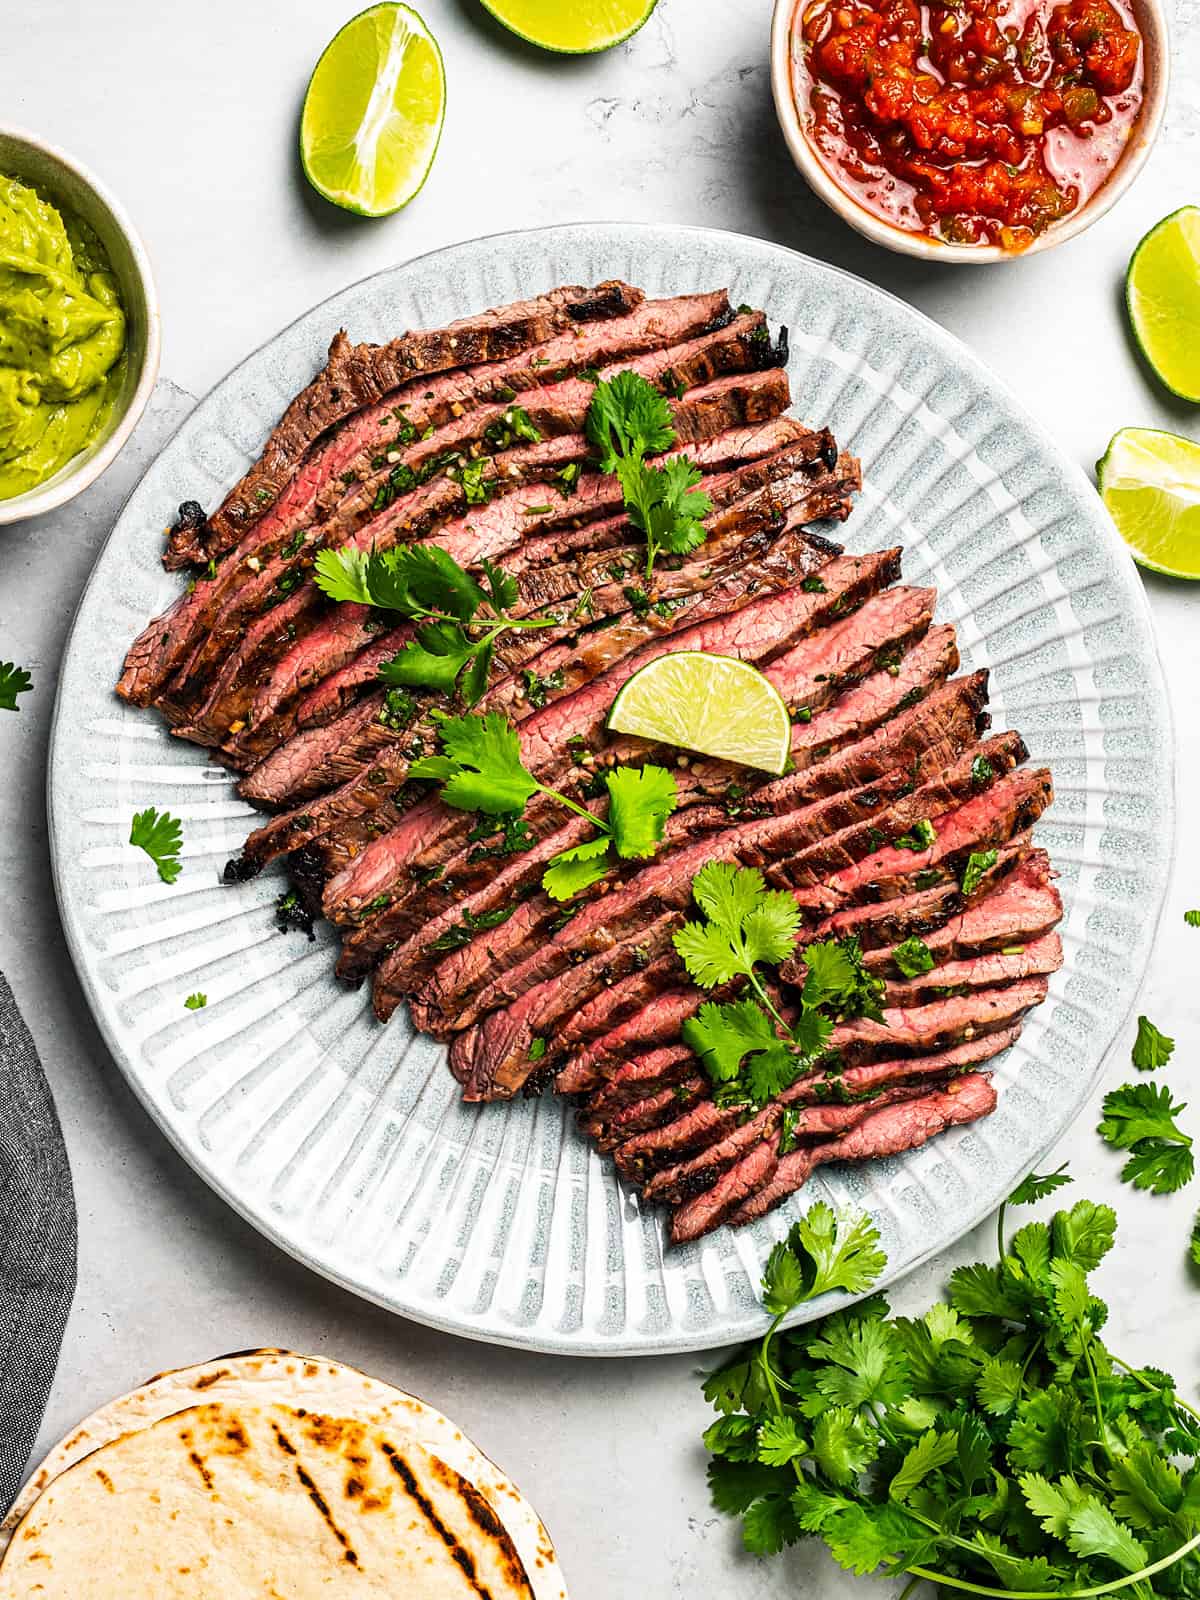 Grilled carne asada cut into thin slices and served on a platter with a garnish of cilantro and lime wedges.